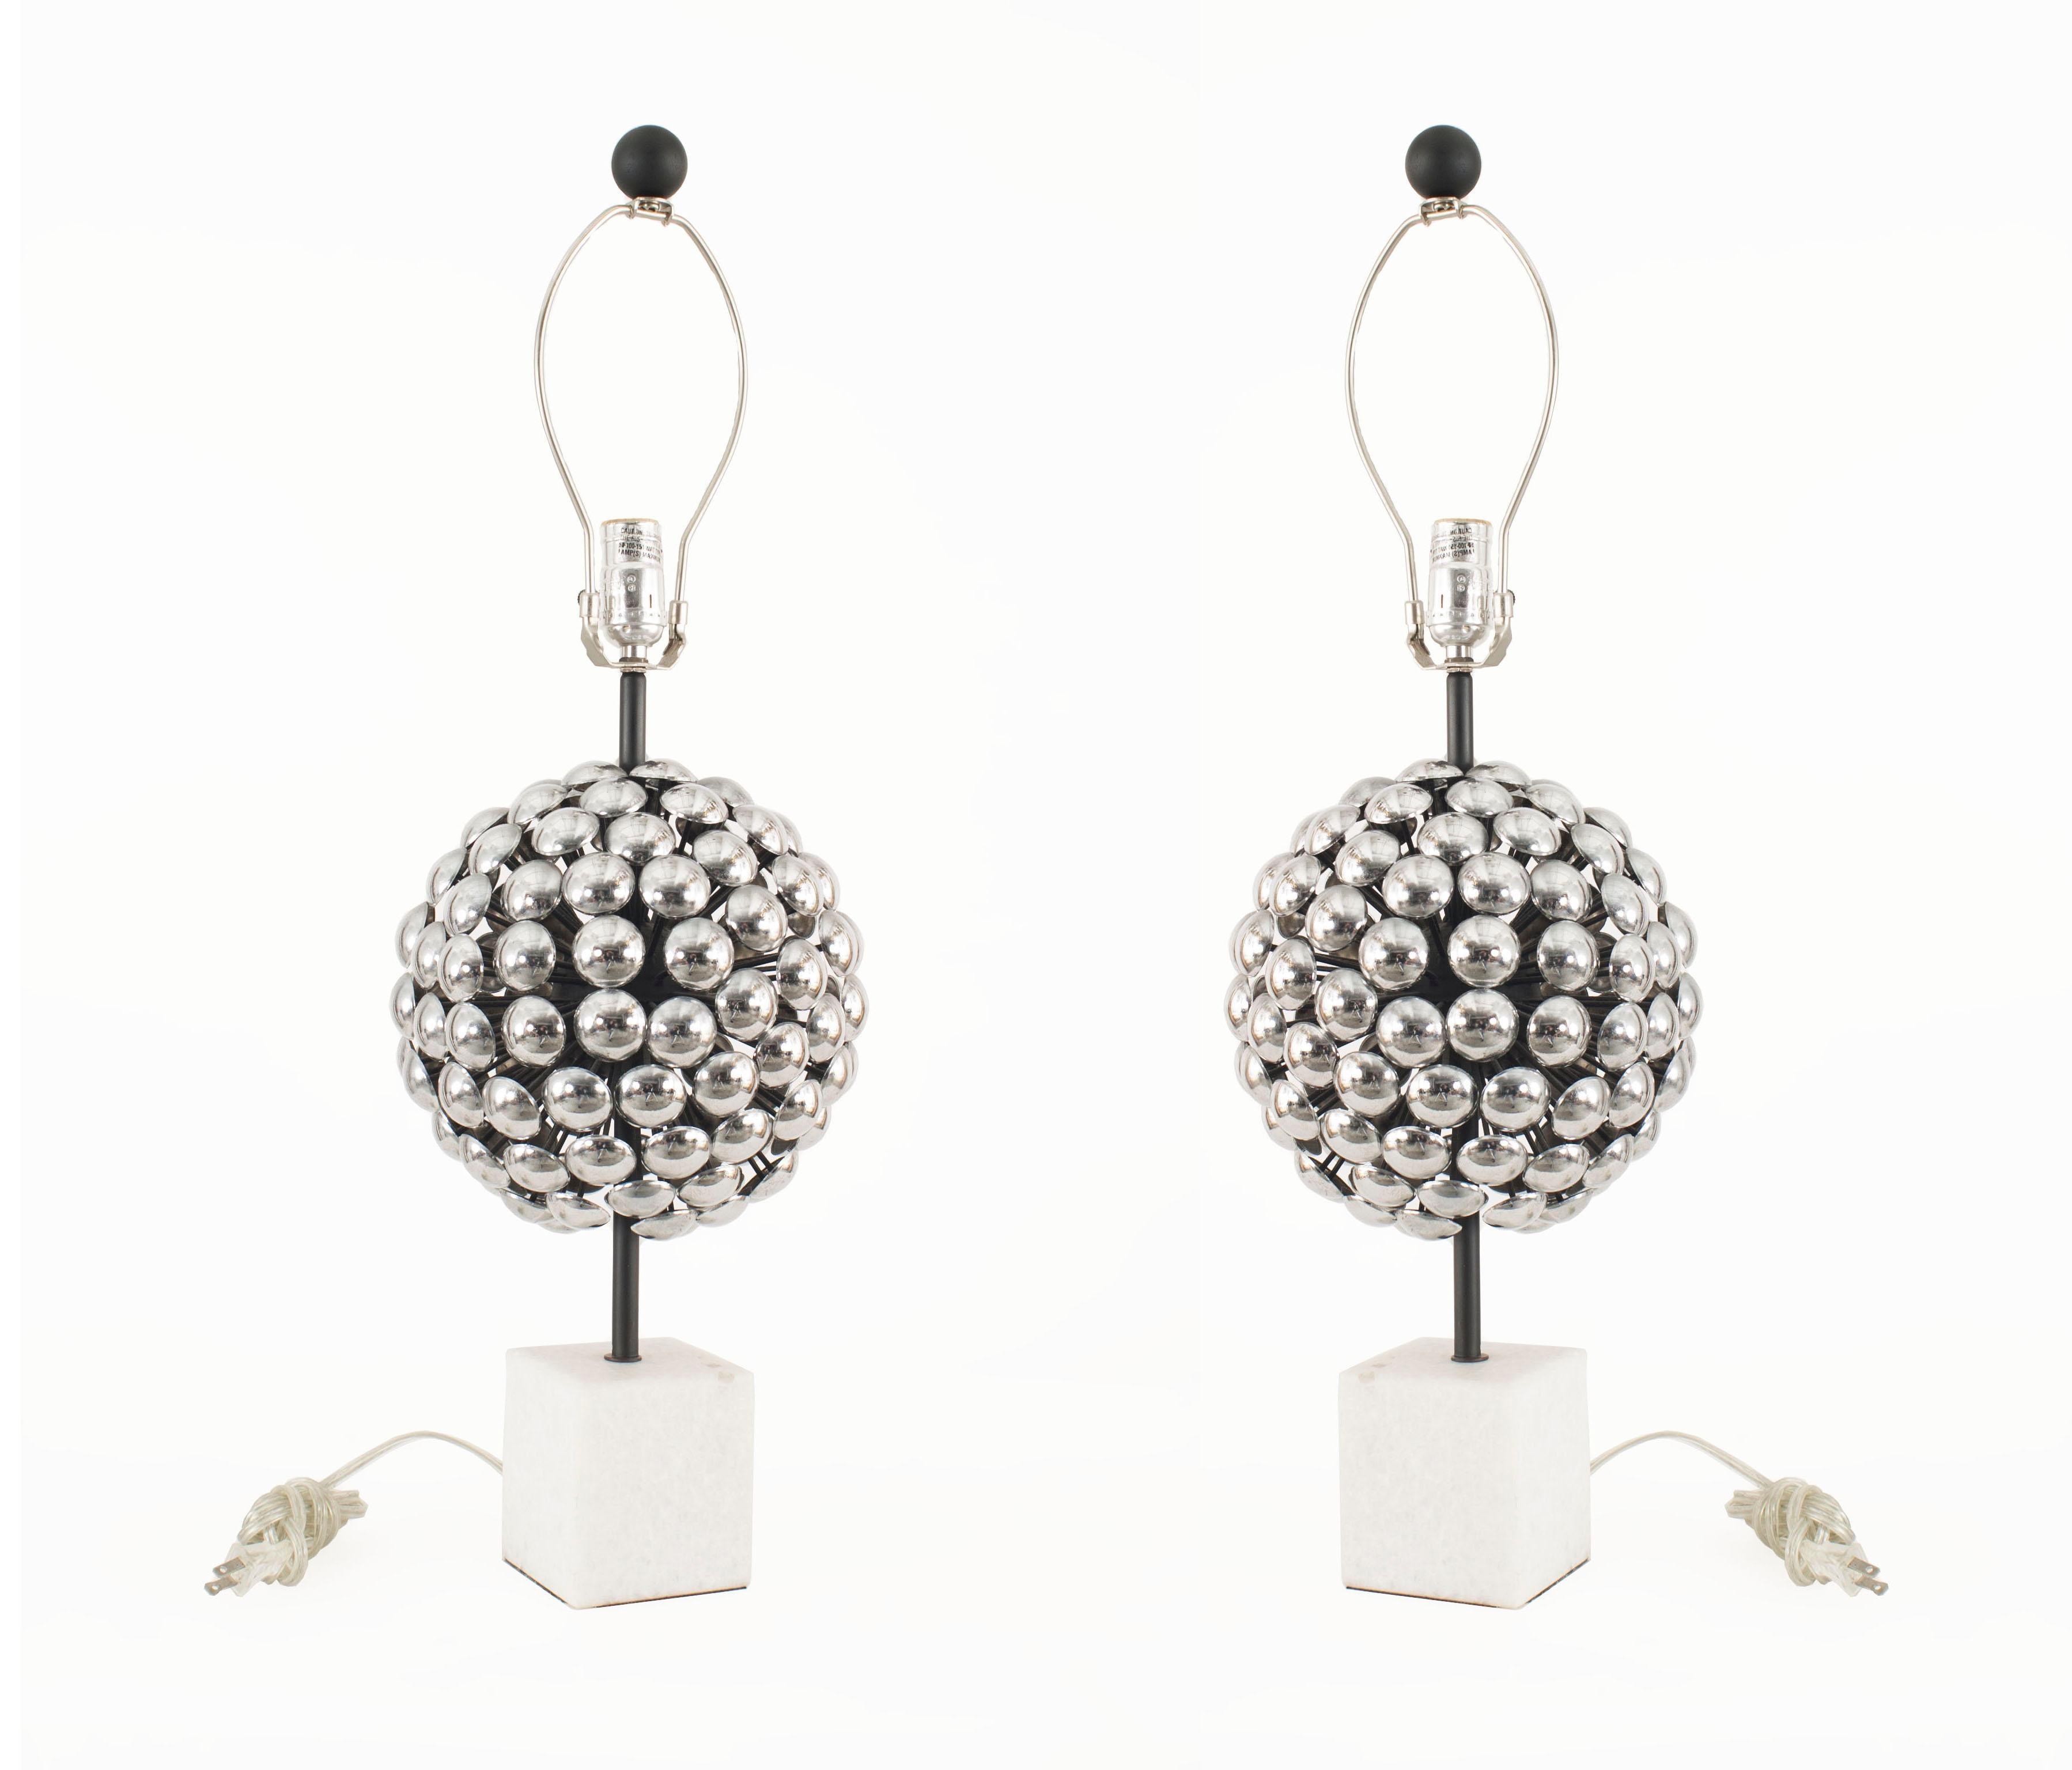 Post-Modern Pair of Post War Italian Silver Sphere Table Lamps For Sale